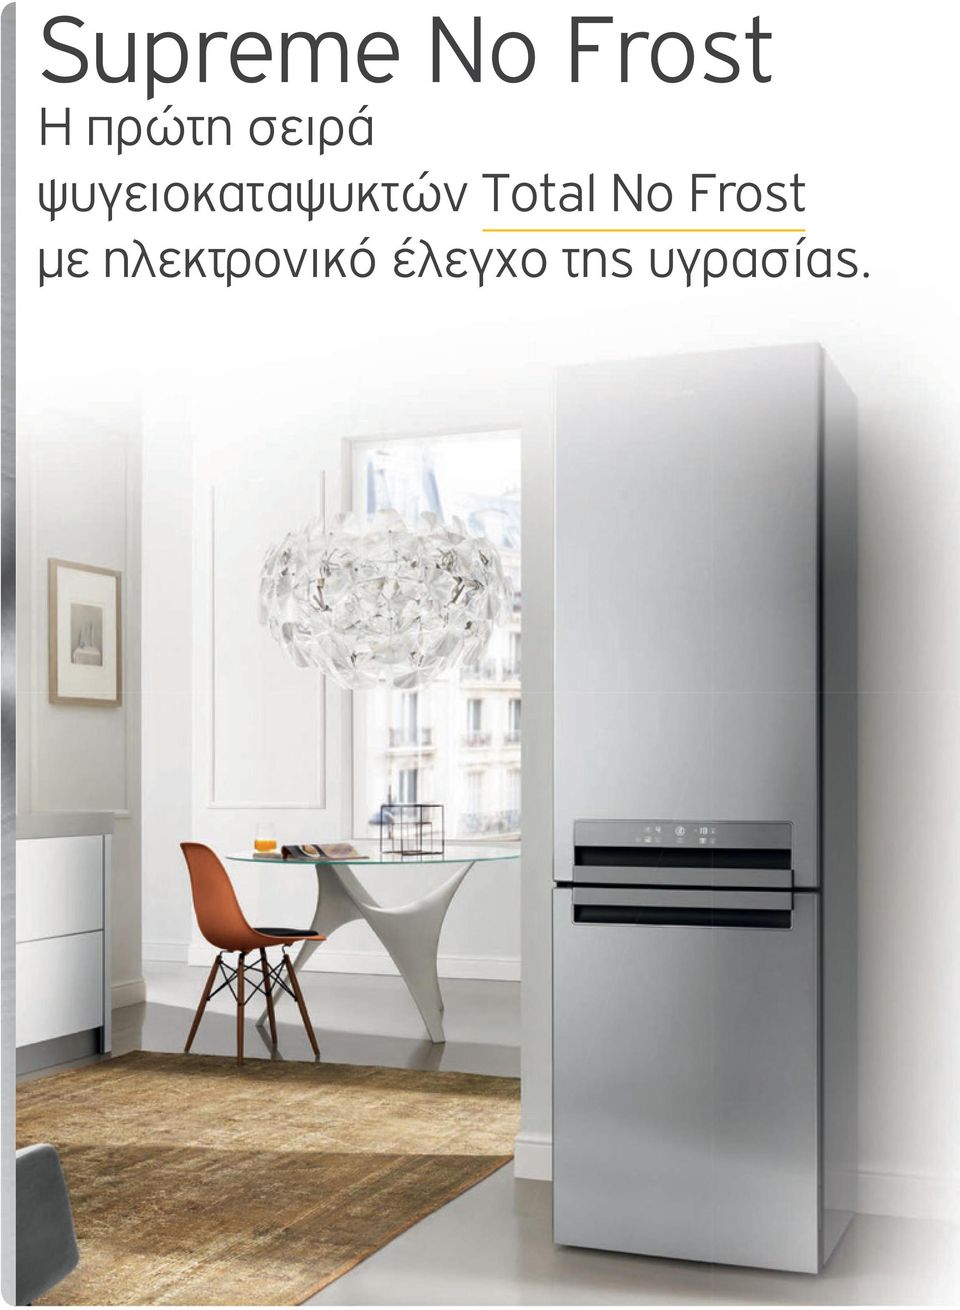 Total No Frost με